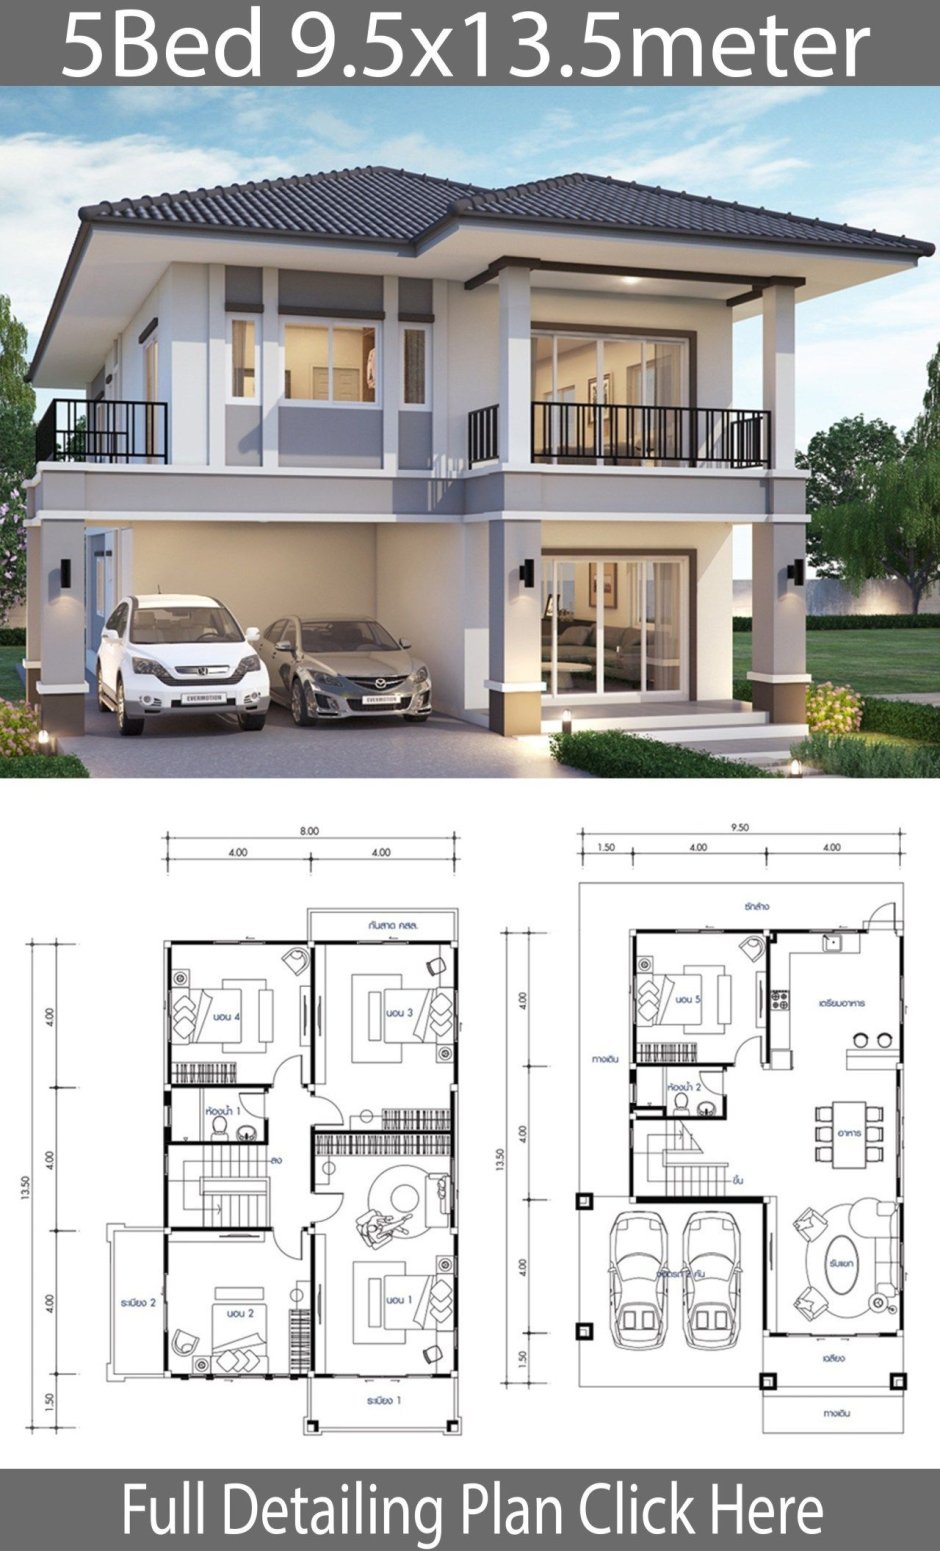 Layout and project of modern houses